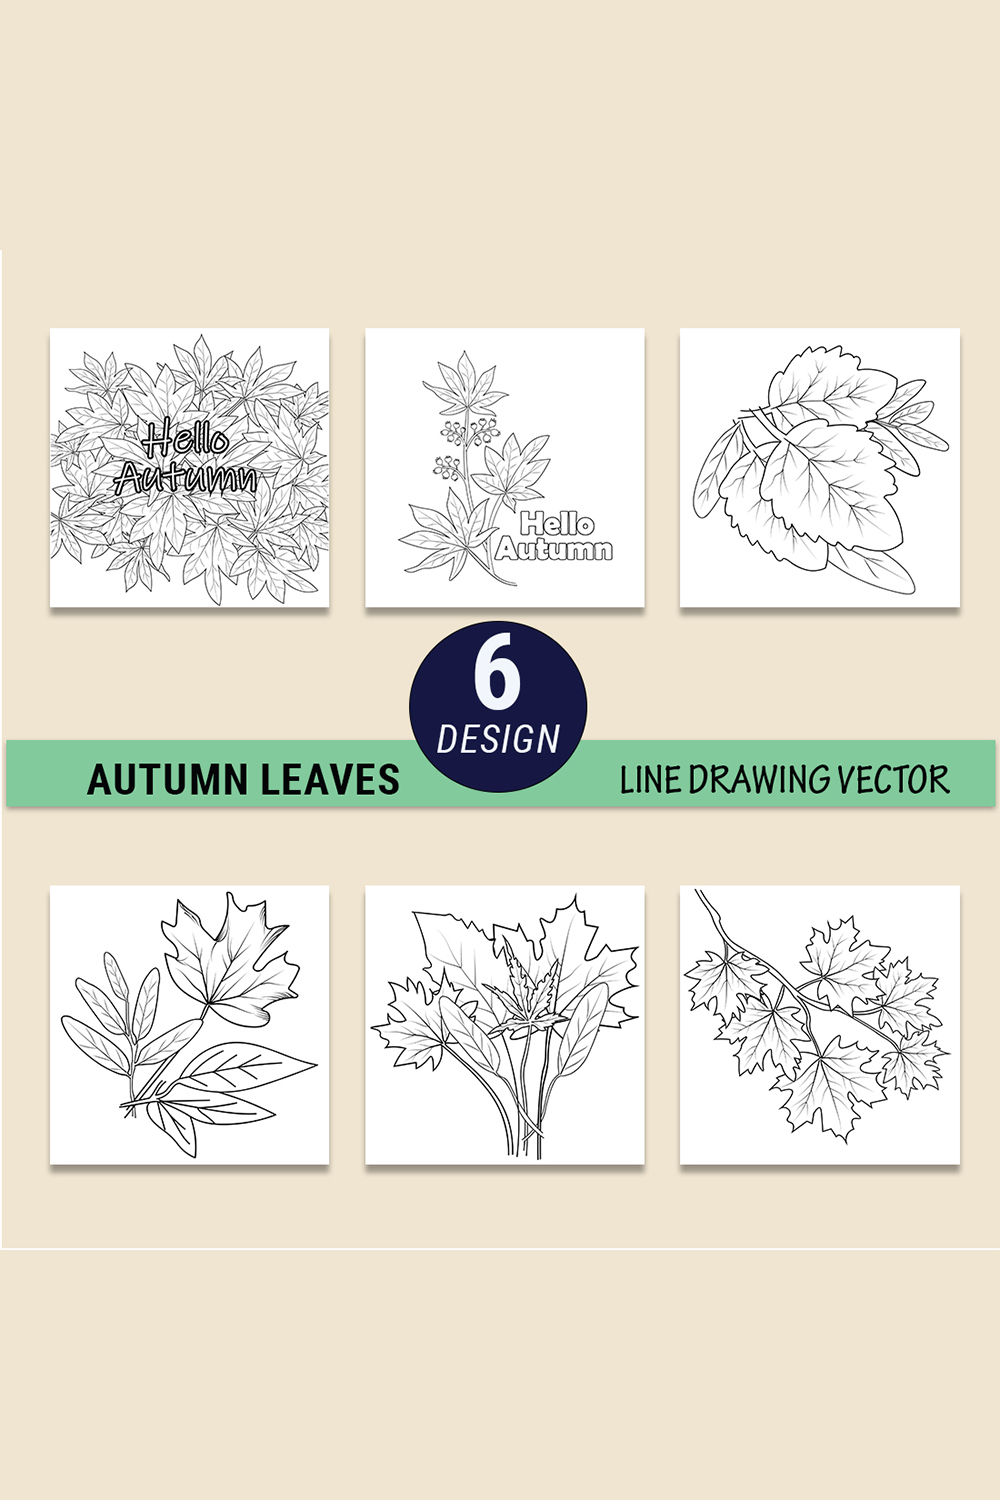 Autumn harvest vegetable pumpkin Autumn Fall season coloring illustration pages, Maple ornate leaves in black isolated on white background pinterest preview image.